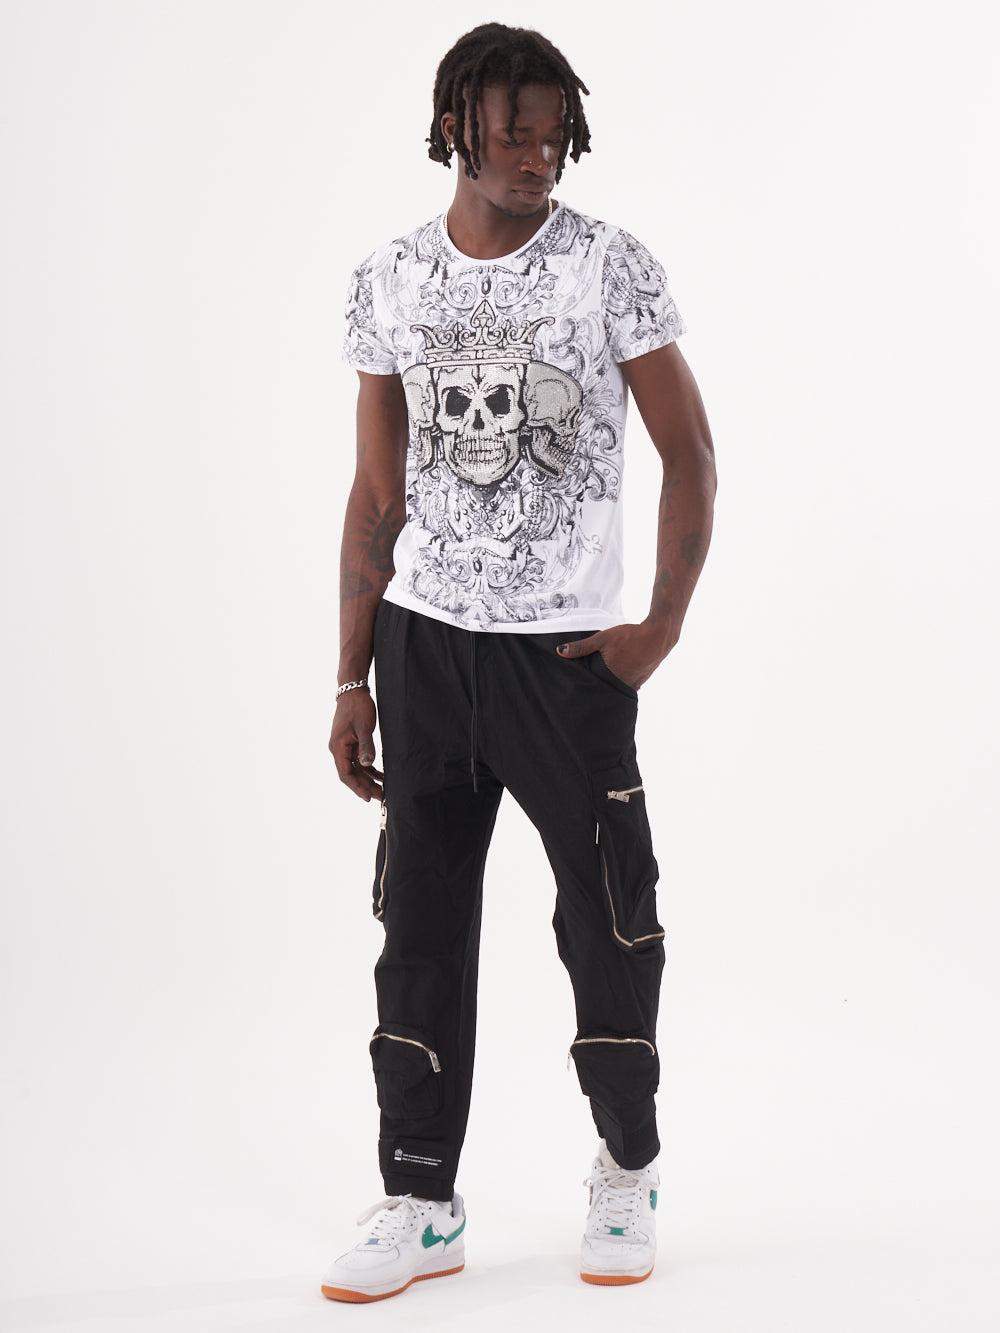 A man with an edgy style, wearing a gothic-inspired TRINITY T-SHIRT | WHITE and black cargo pants.